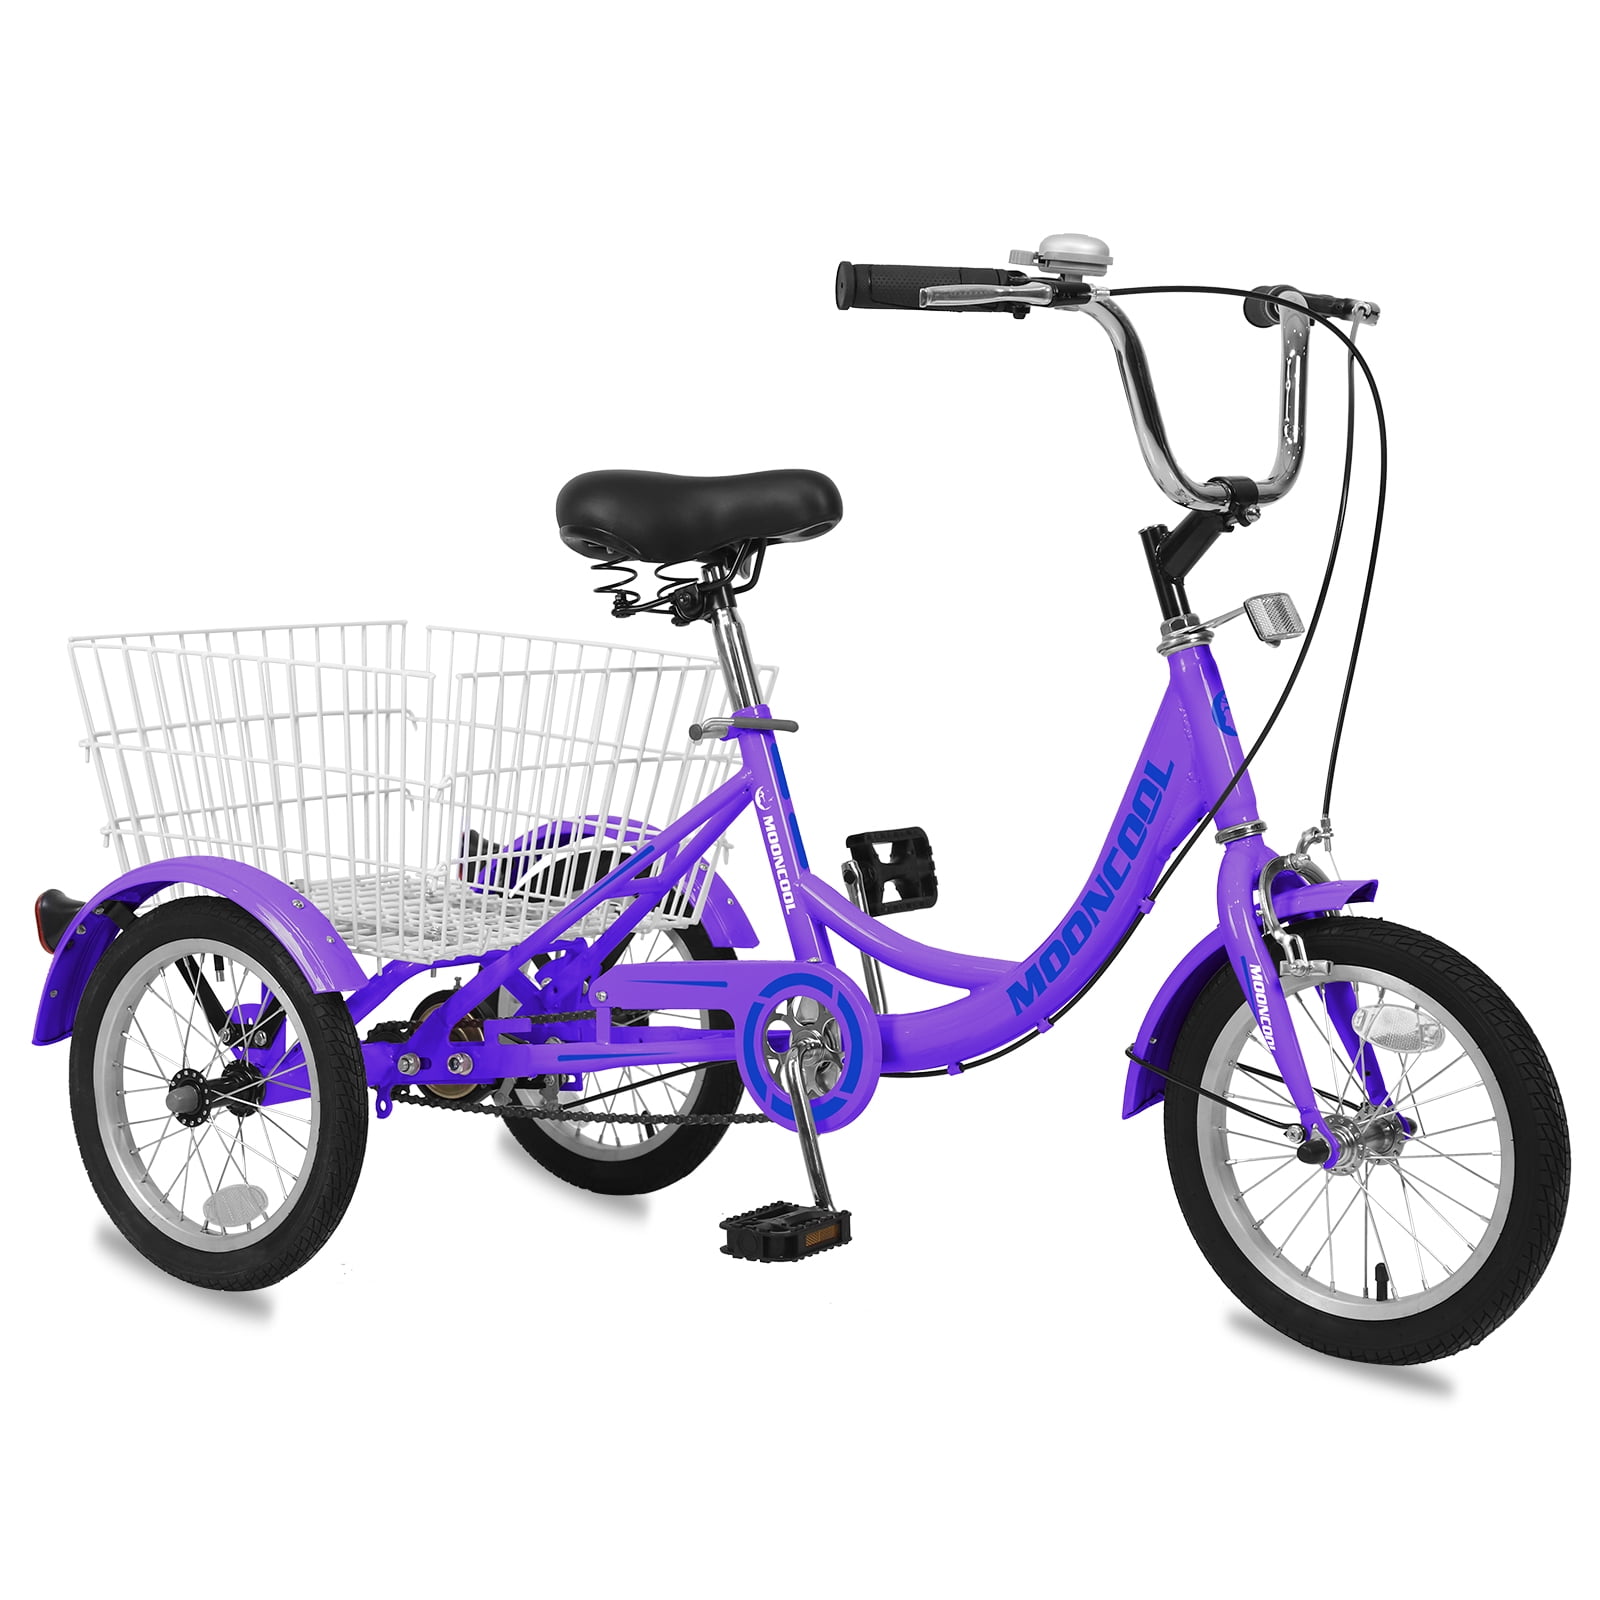 MOPHOTO 14 inch 16 inch Trikes for Beginner Riders Low Step Through Three-Wheeled Bicycles with Rear Basket Small Tricycle Single Speed 3 Wheel Bikes 